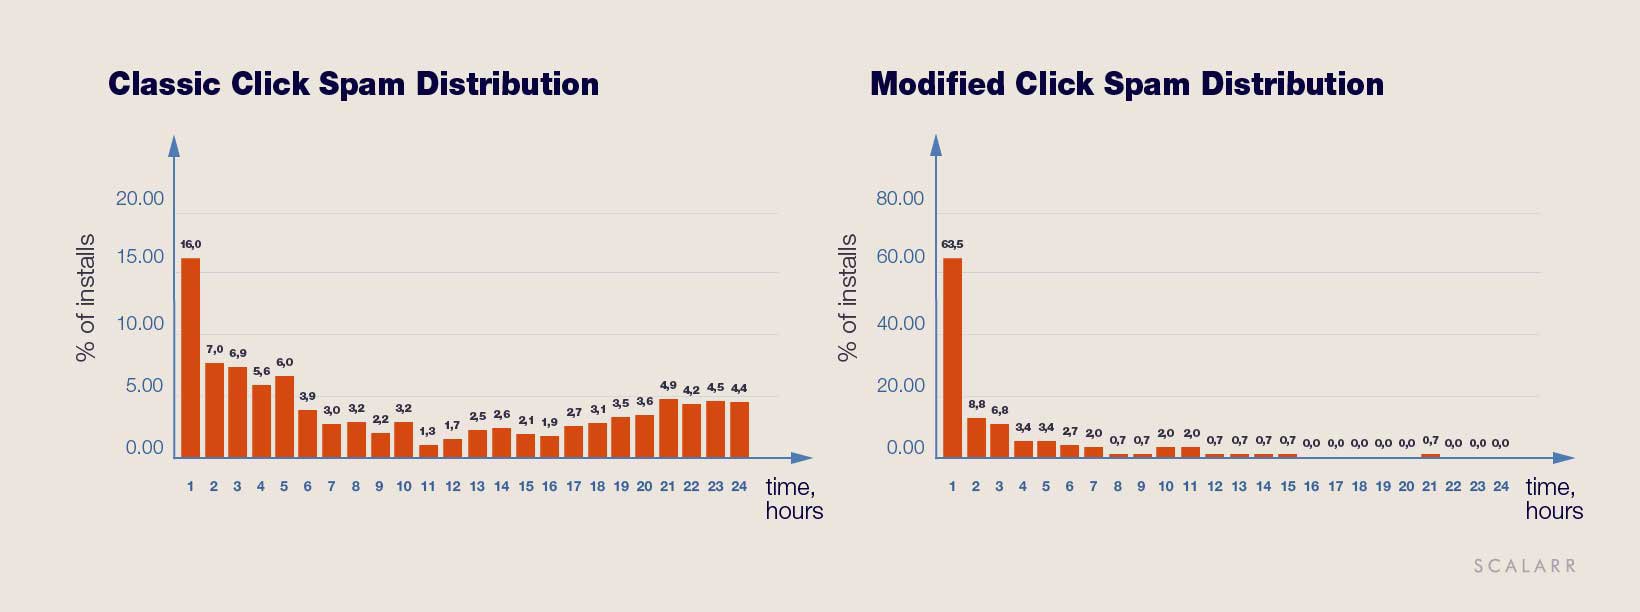 Modified Click Spam distribution by hours